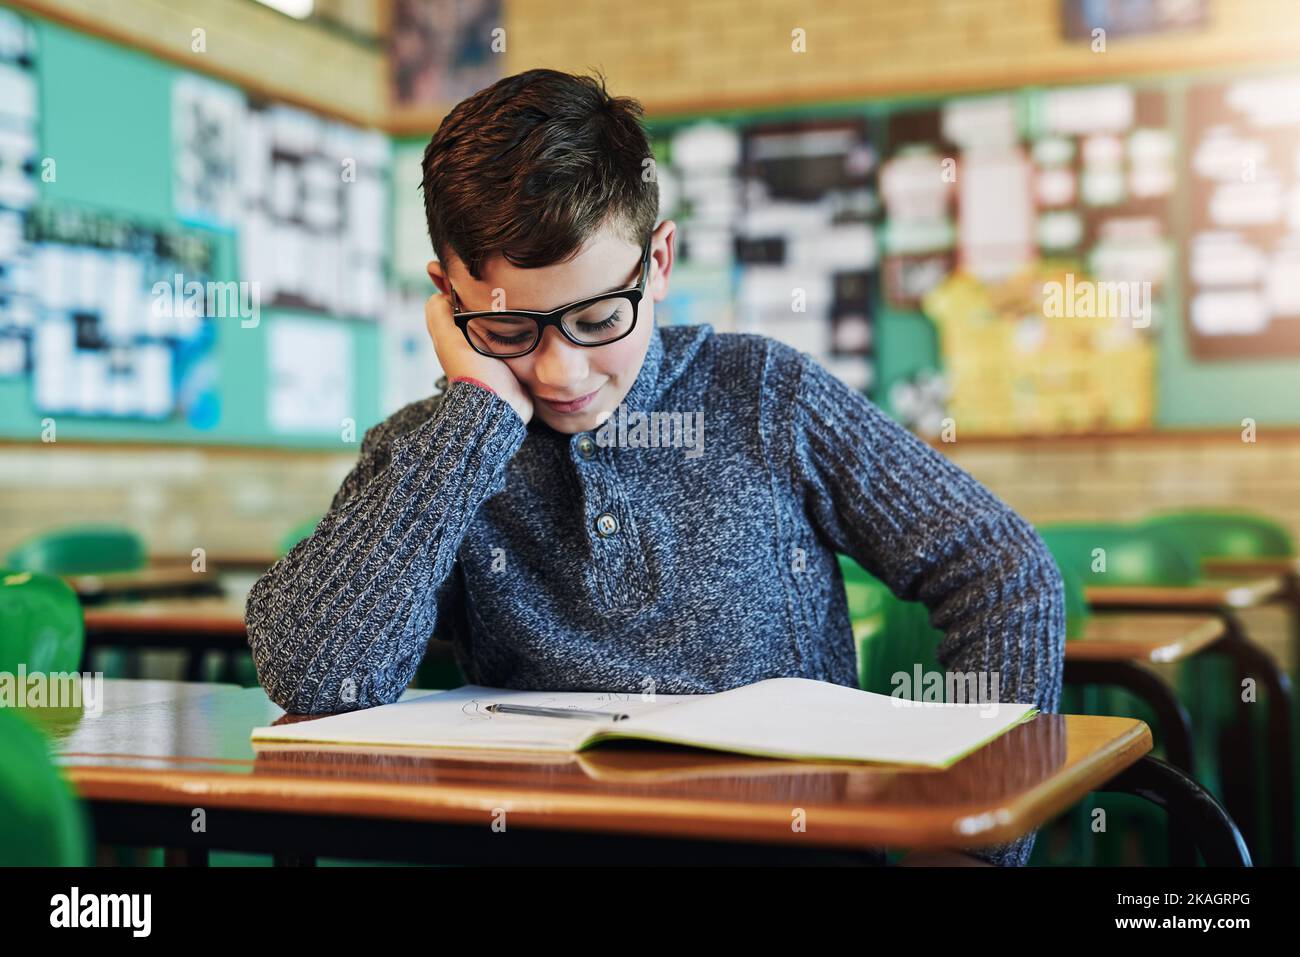 He always falls asleep when reading that book in class. an elementary school boy sleeping at his desk in class. Stock Photo